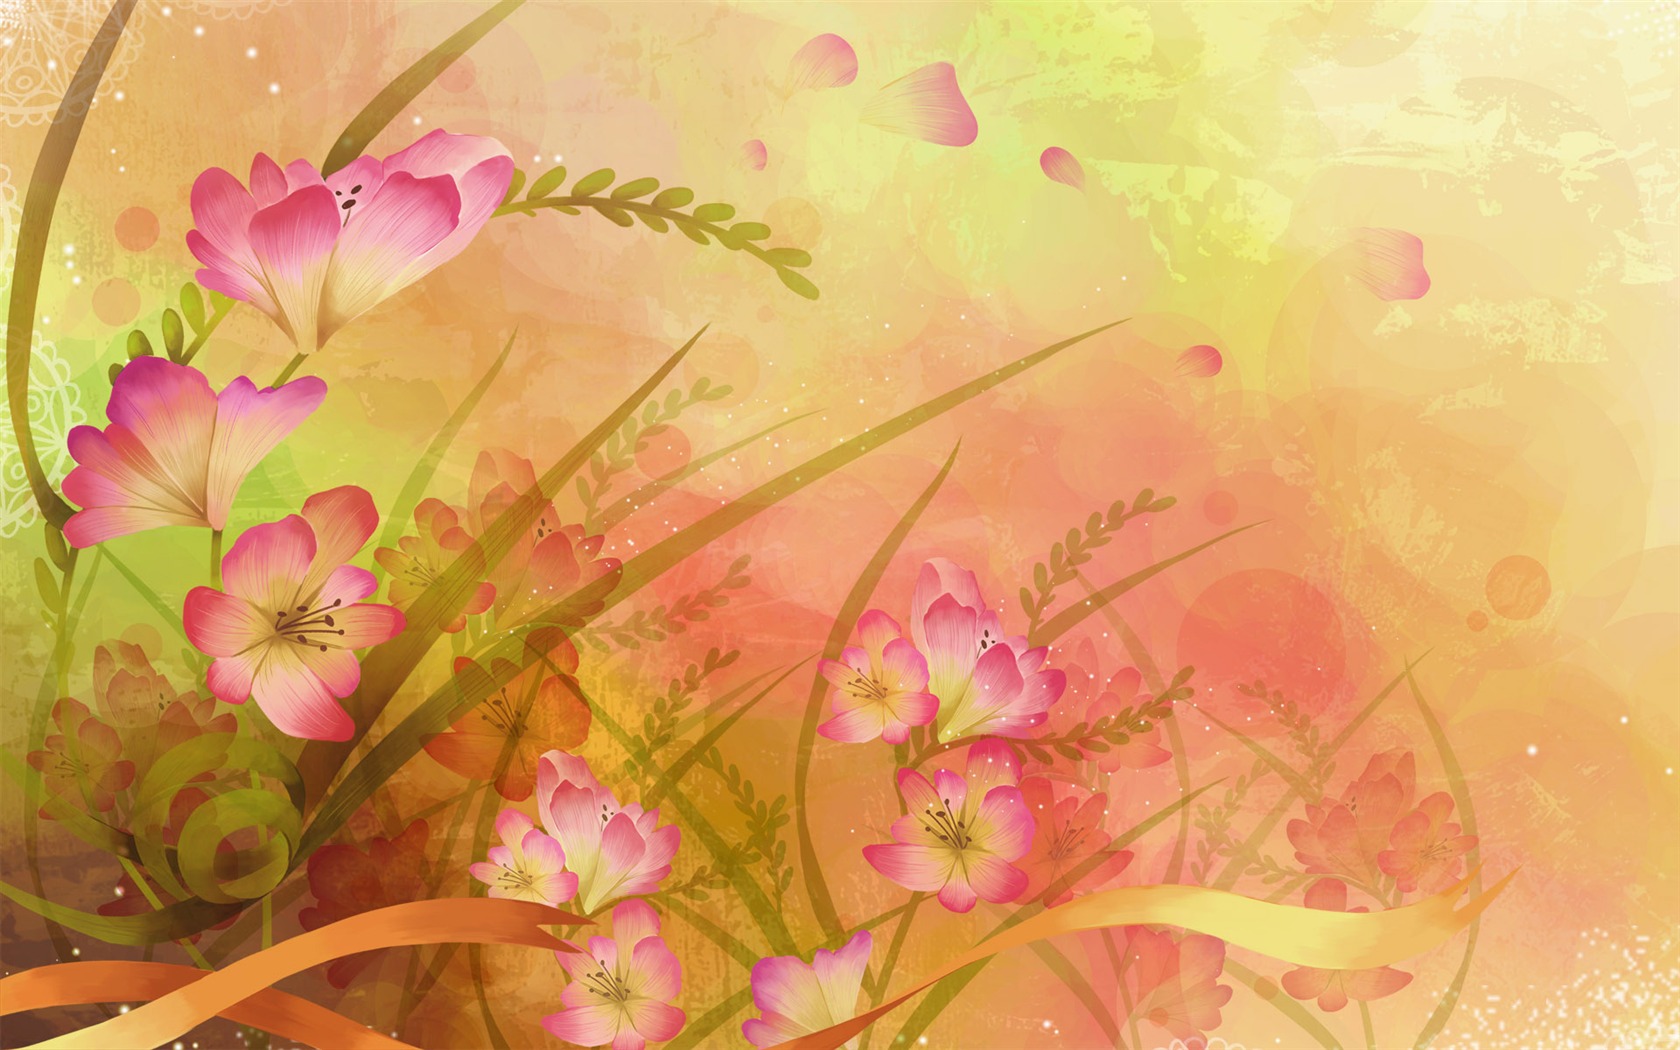 Synthetic Wallpaper Colorful Flower #40 - 1680x1050